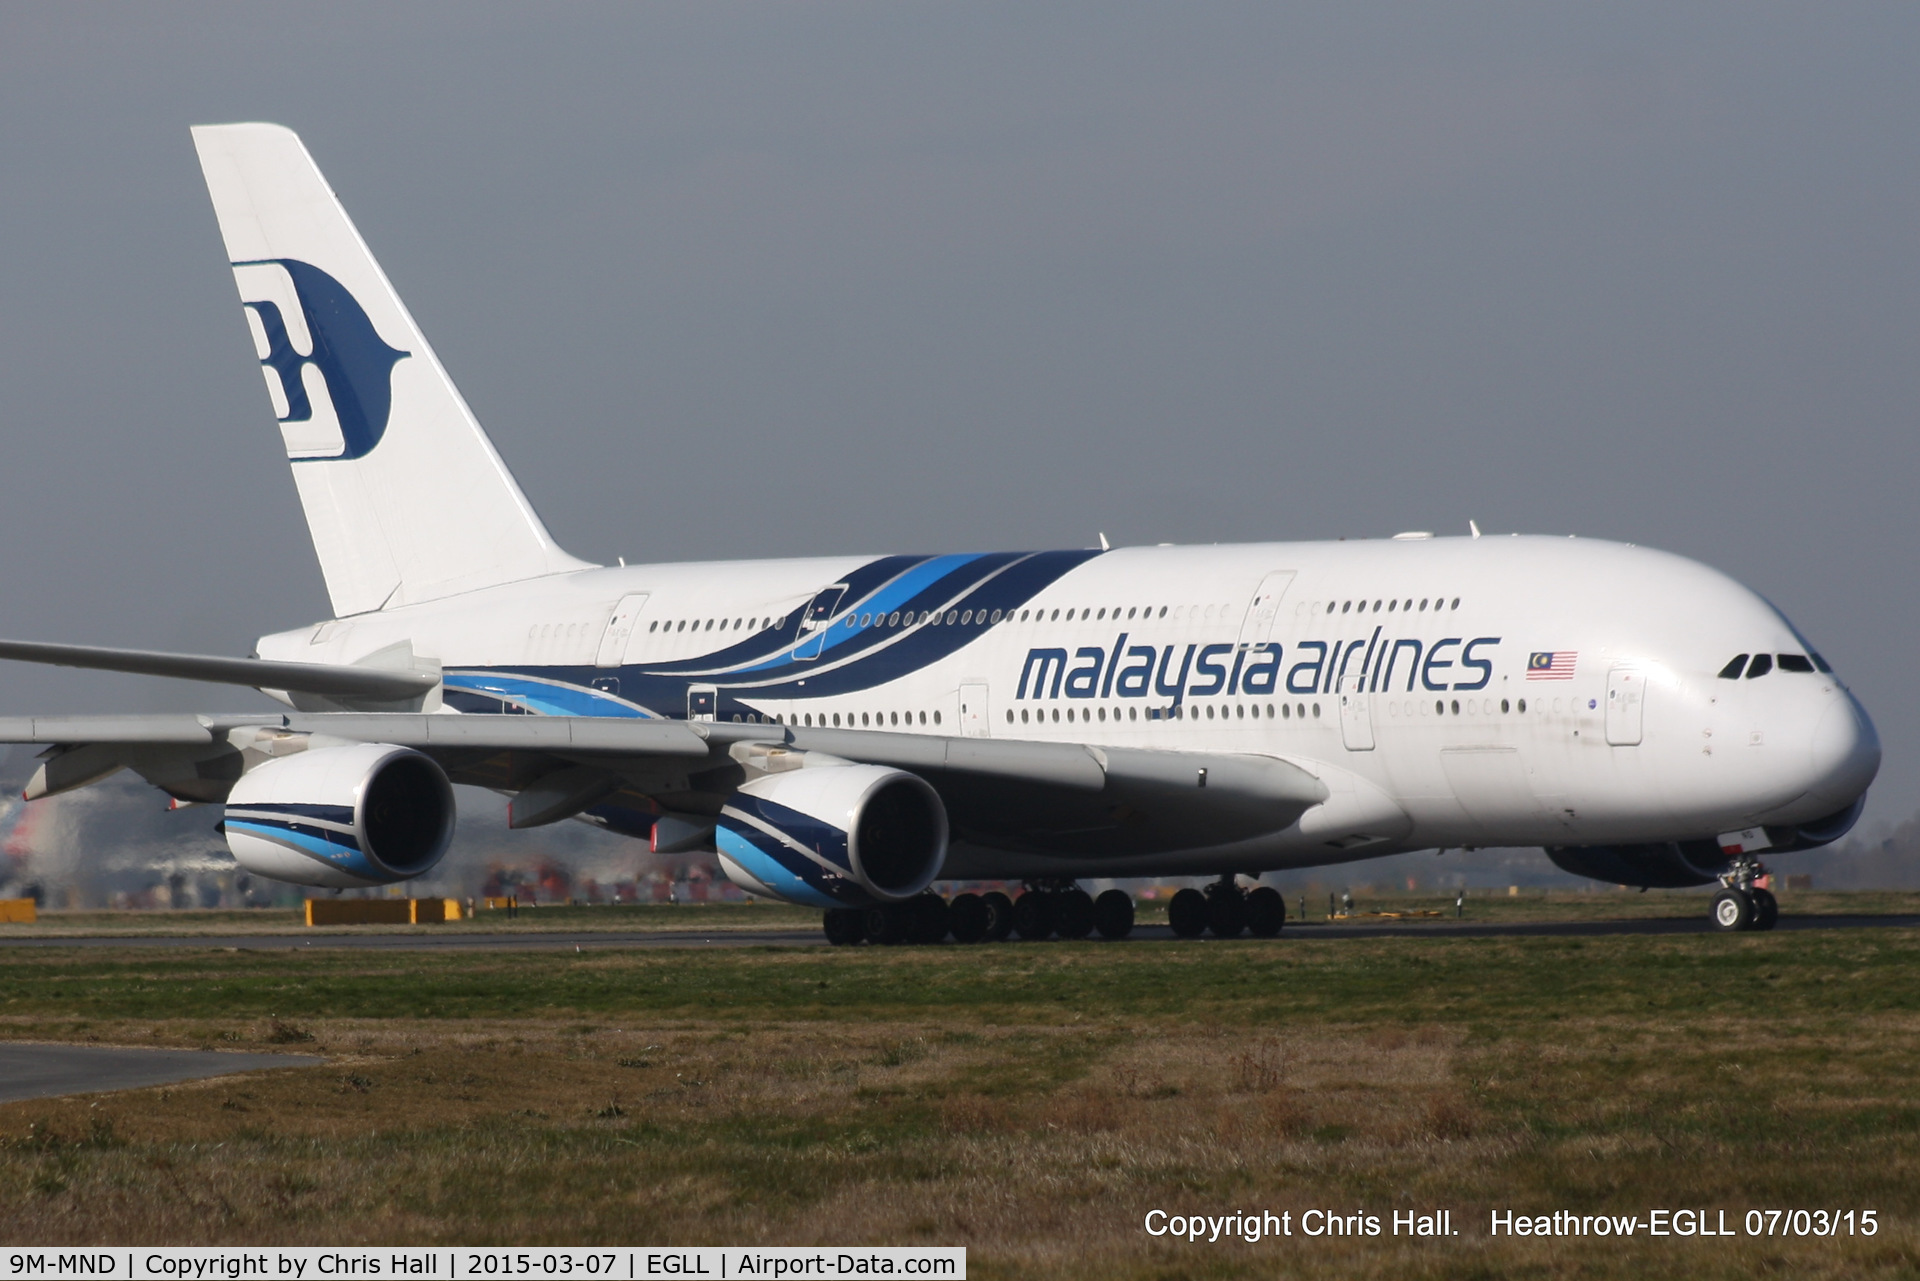 9M-MND, 2012 Airbus A380-841 C/N 089, Malaysia Airlines